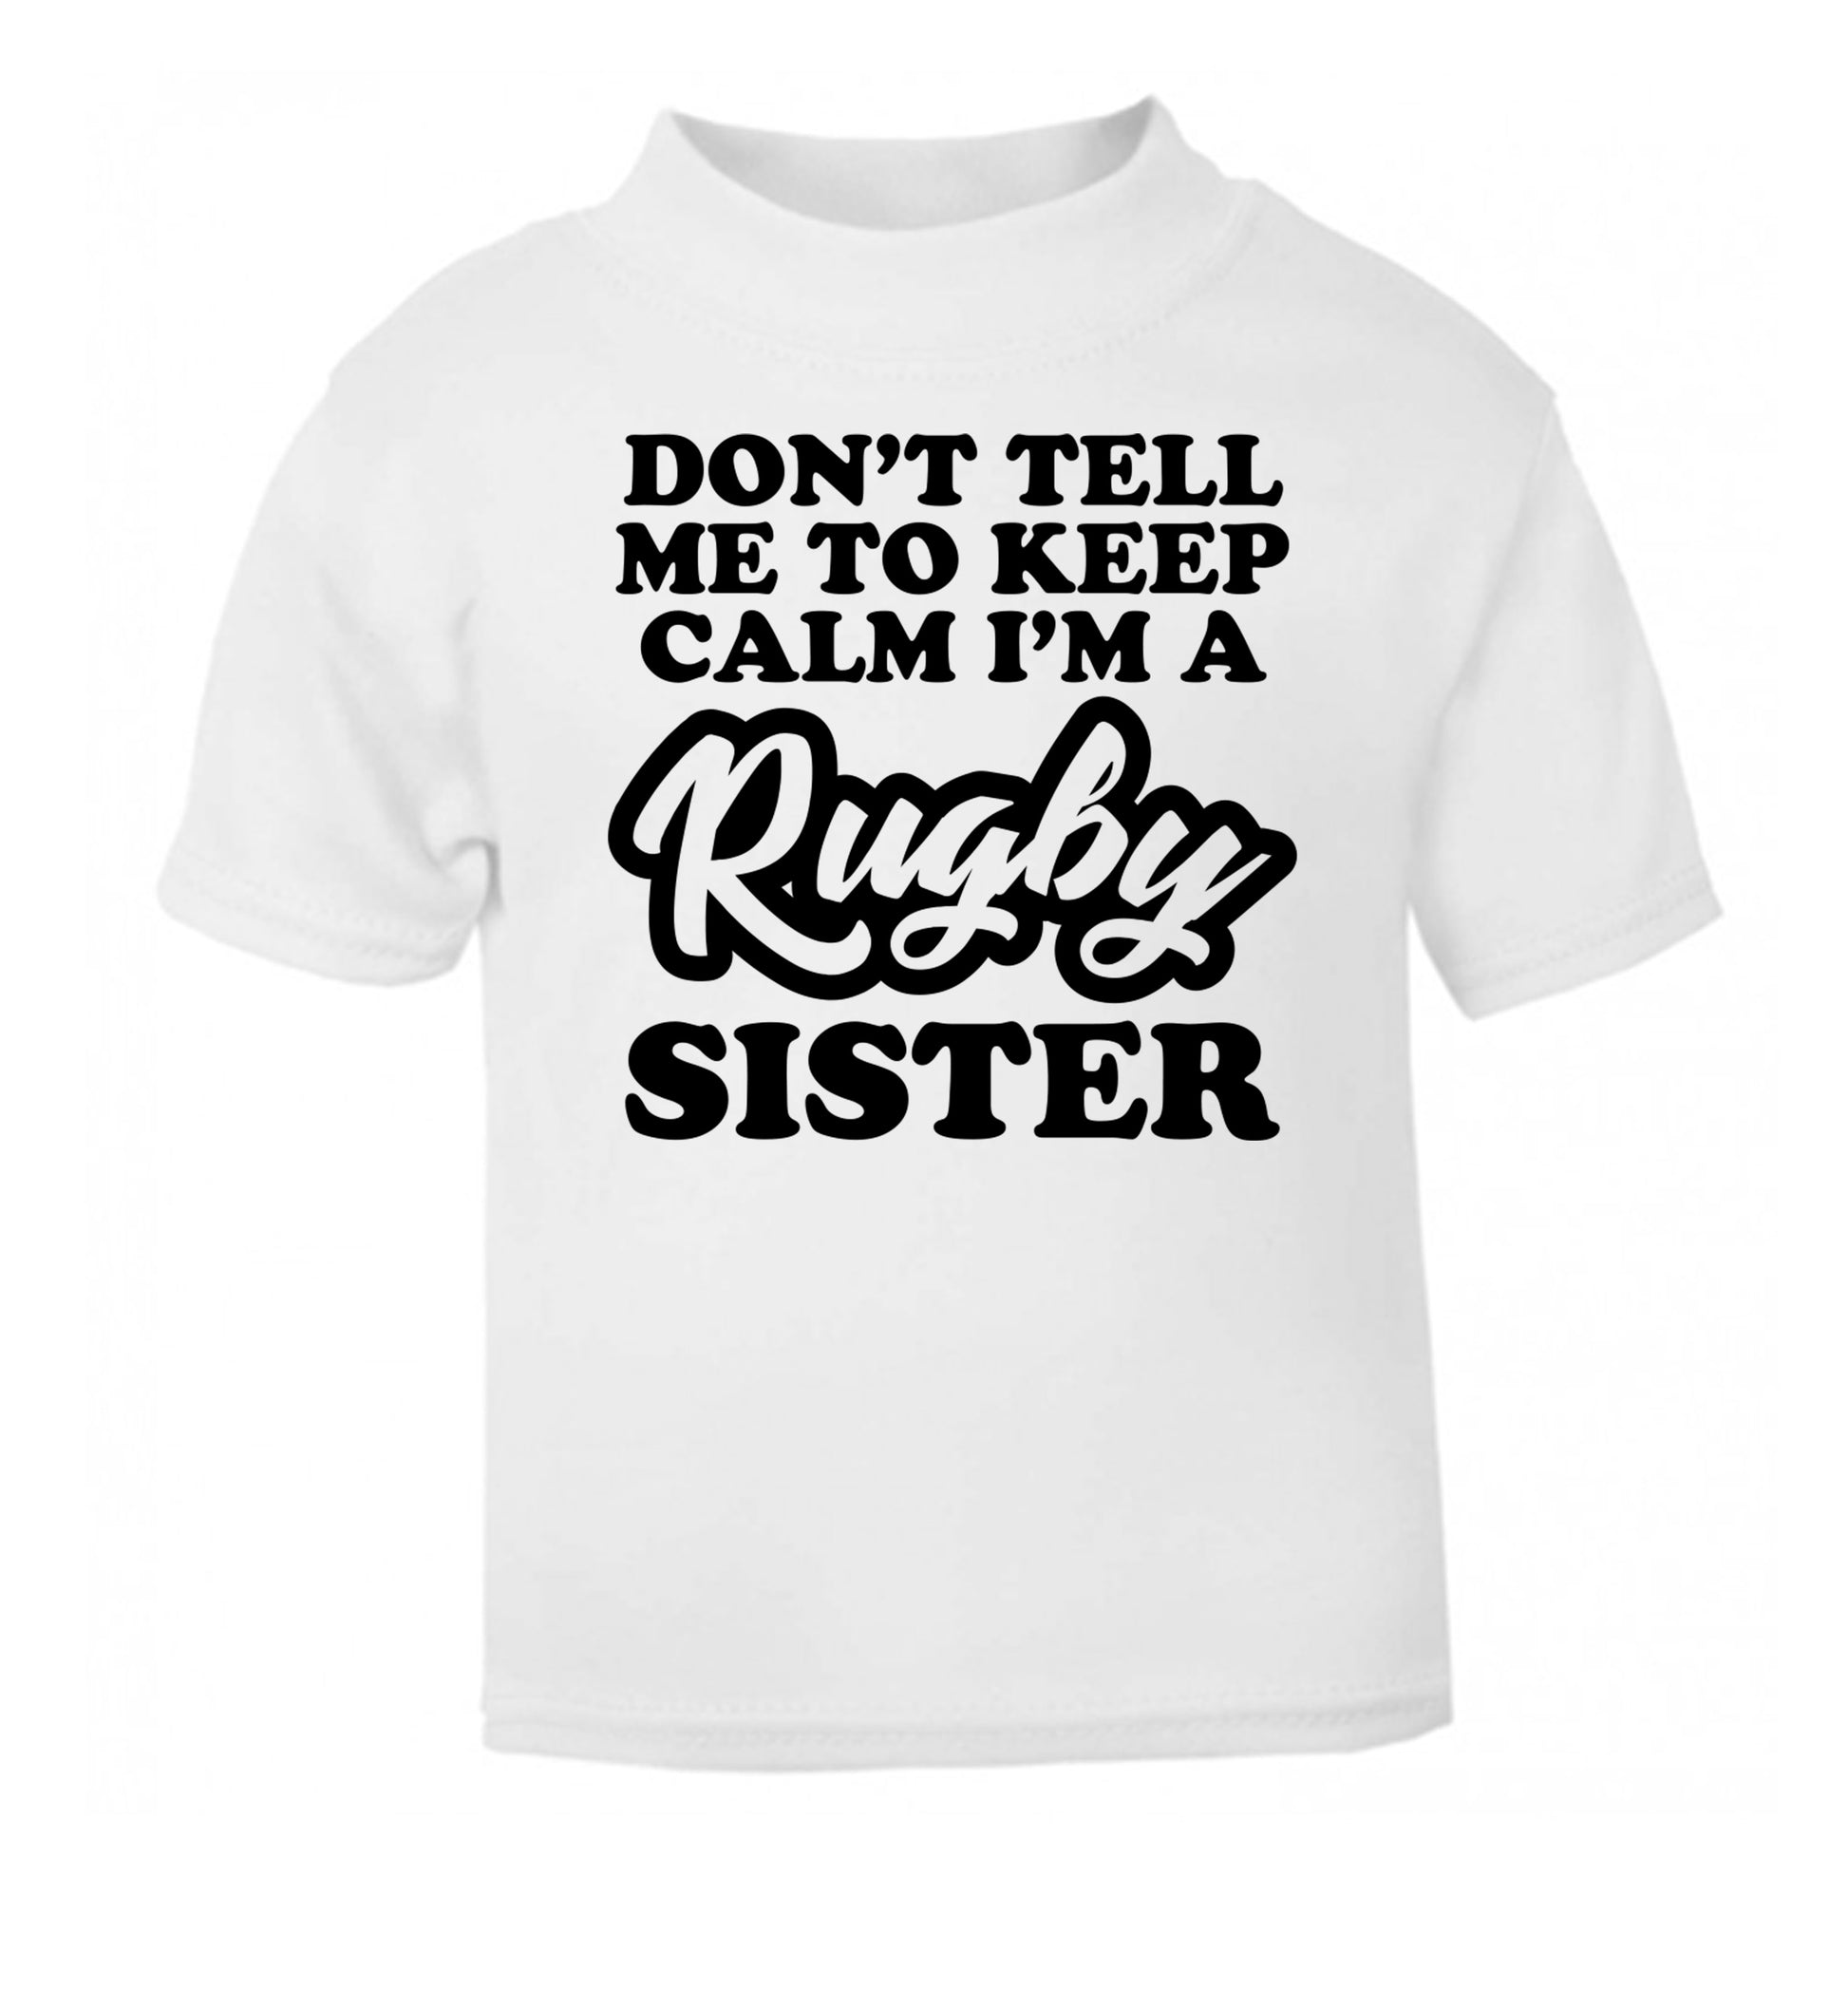 Don't tell me keep calm I'm a rugby sister white Baby Toddler Tshirt 2 Years